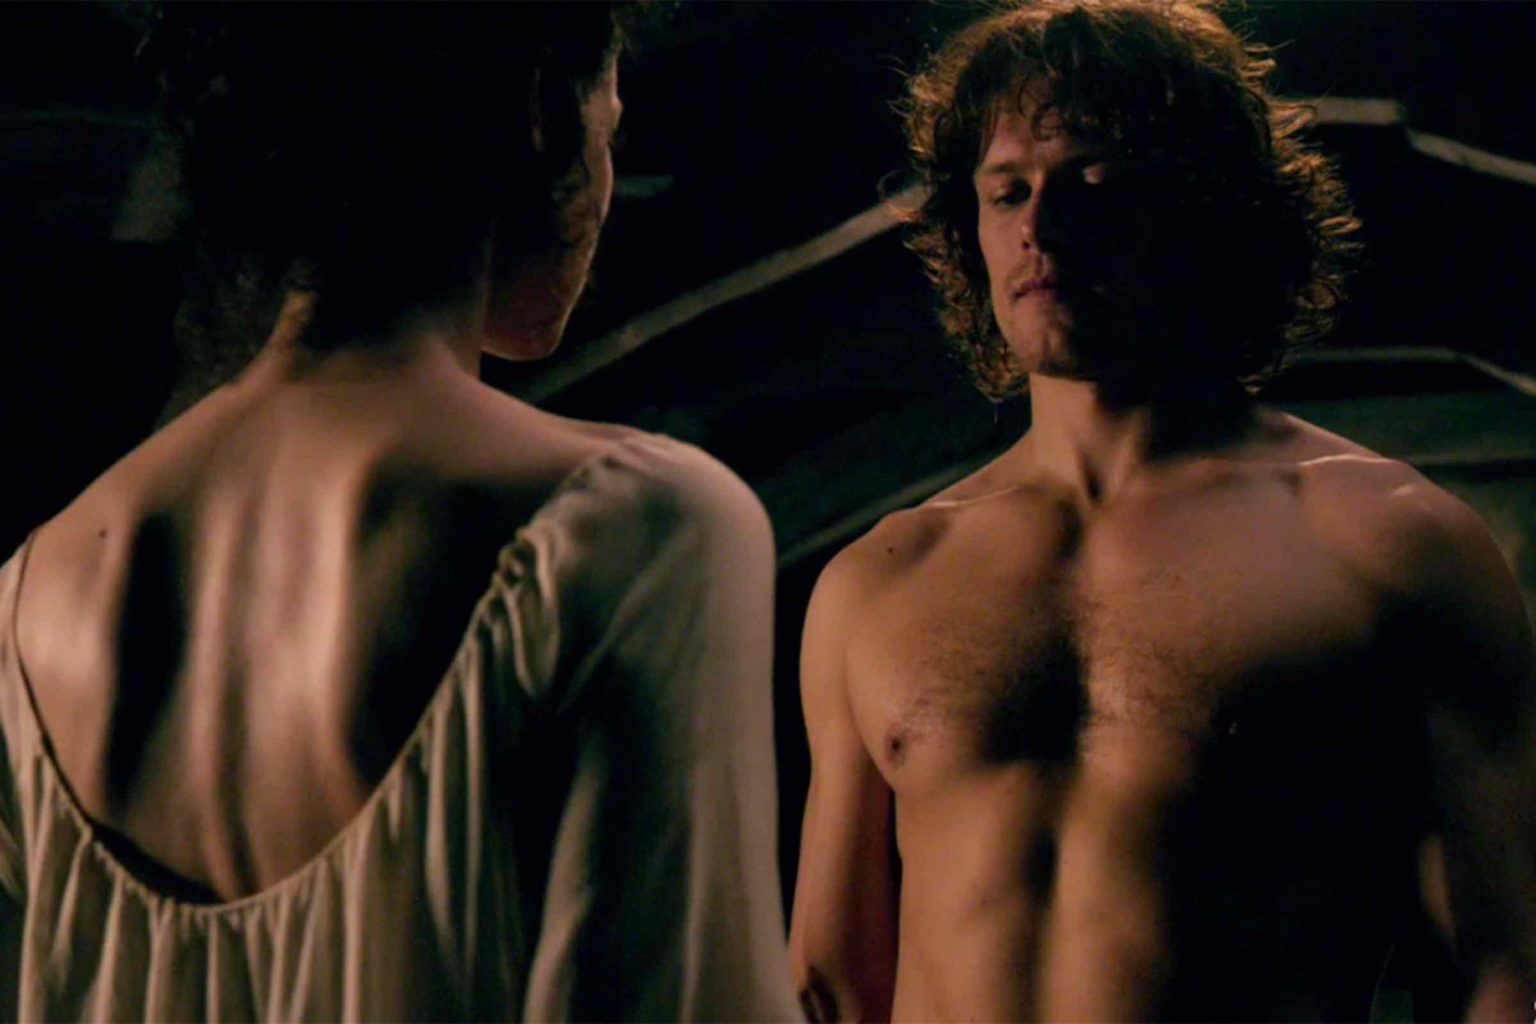 Jamie Fraser from Starz's 'Outlander' is truly the ideal man. We had to make a list of our favorite hottest moments from 'Outlander'.